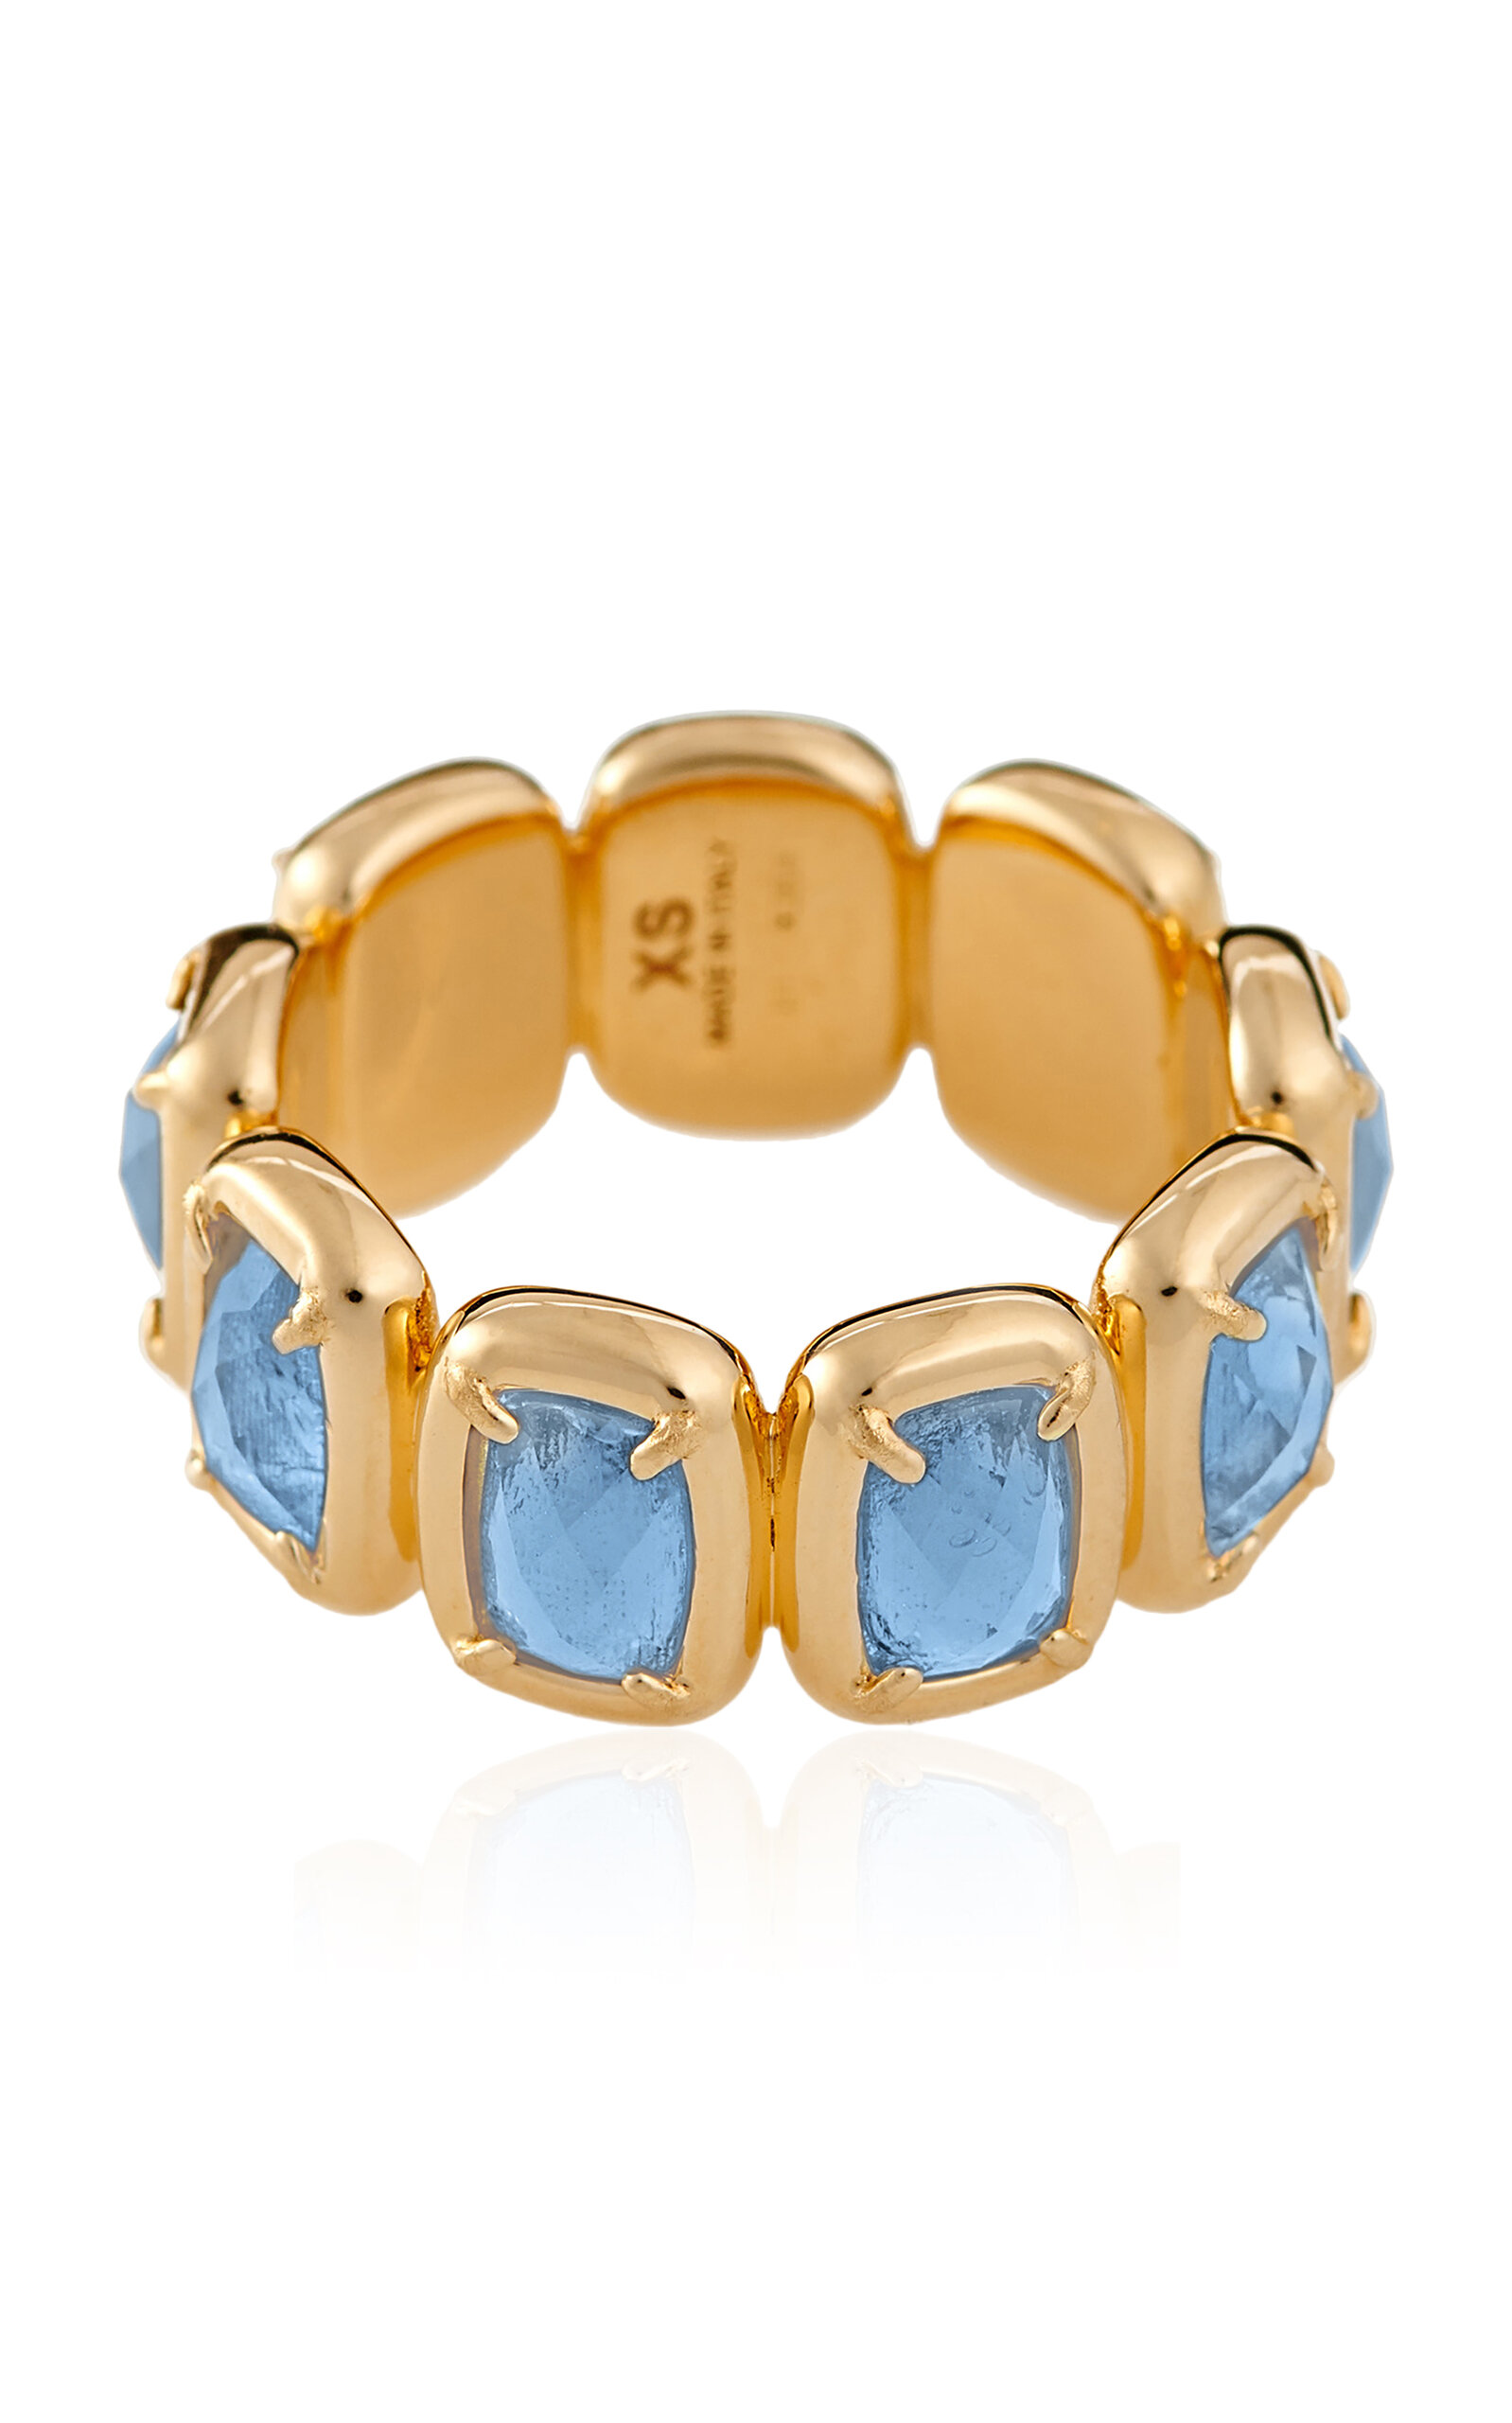 IVI Women's Toy 18k Gold-Plated Glass Stone Enamel Ring